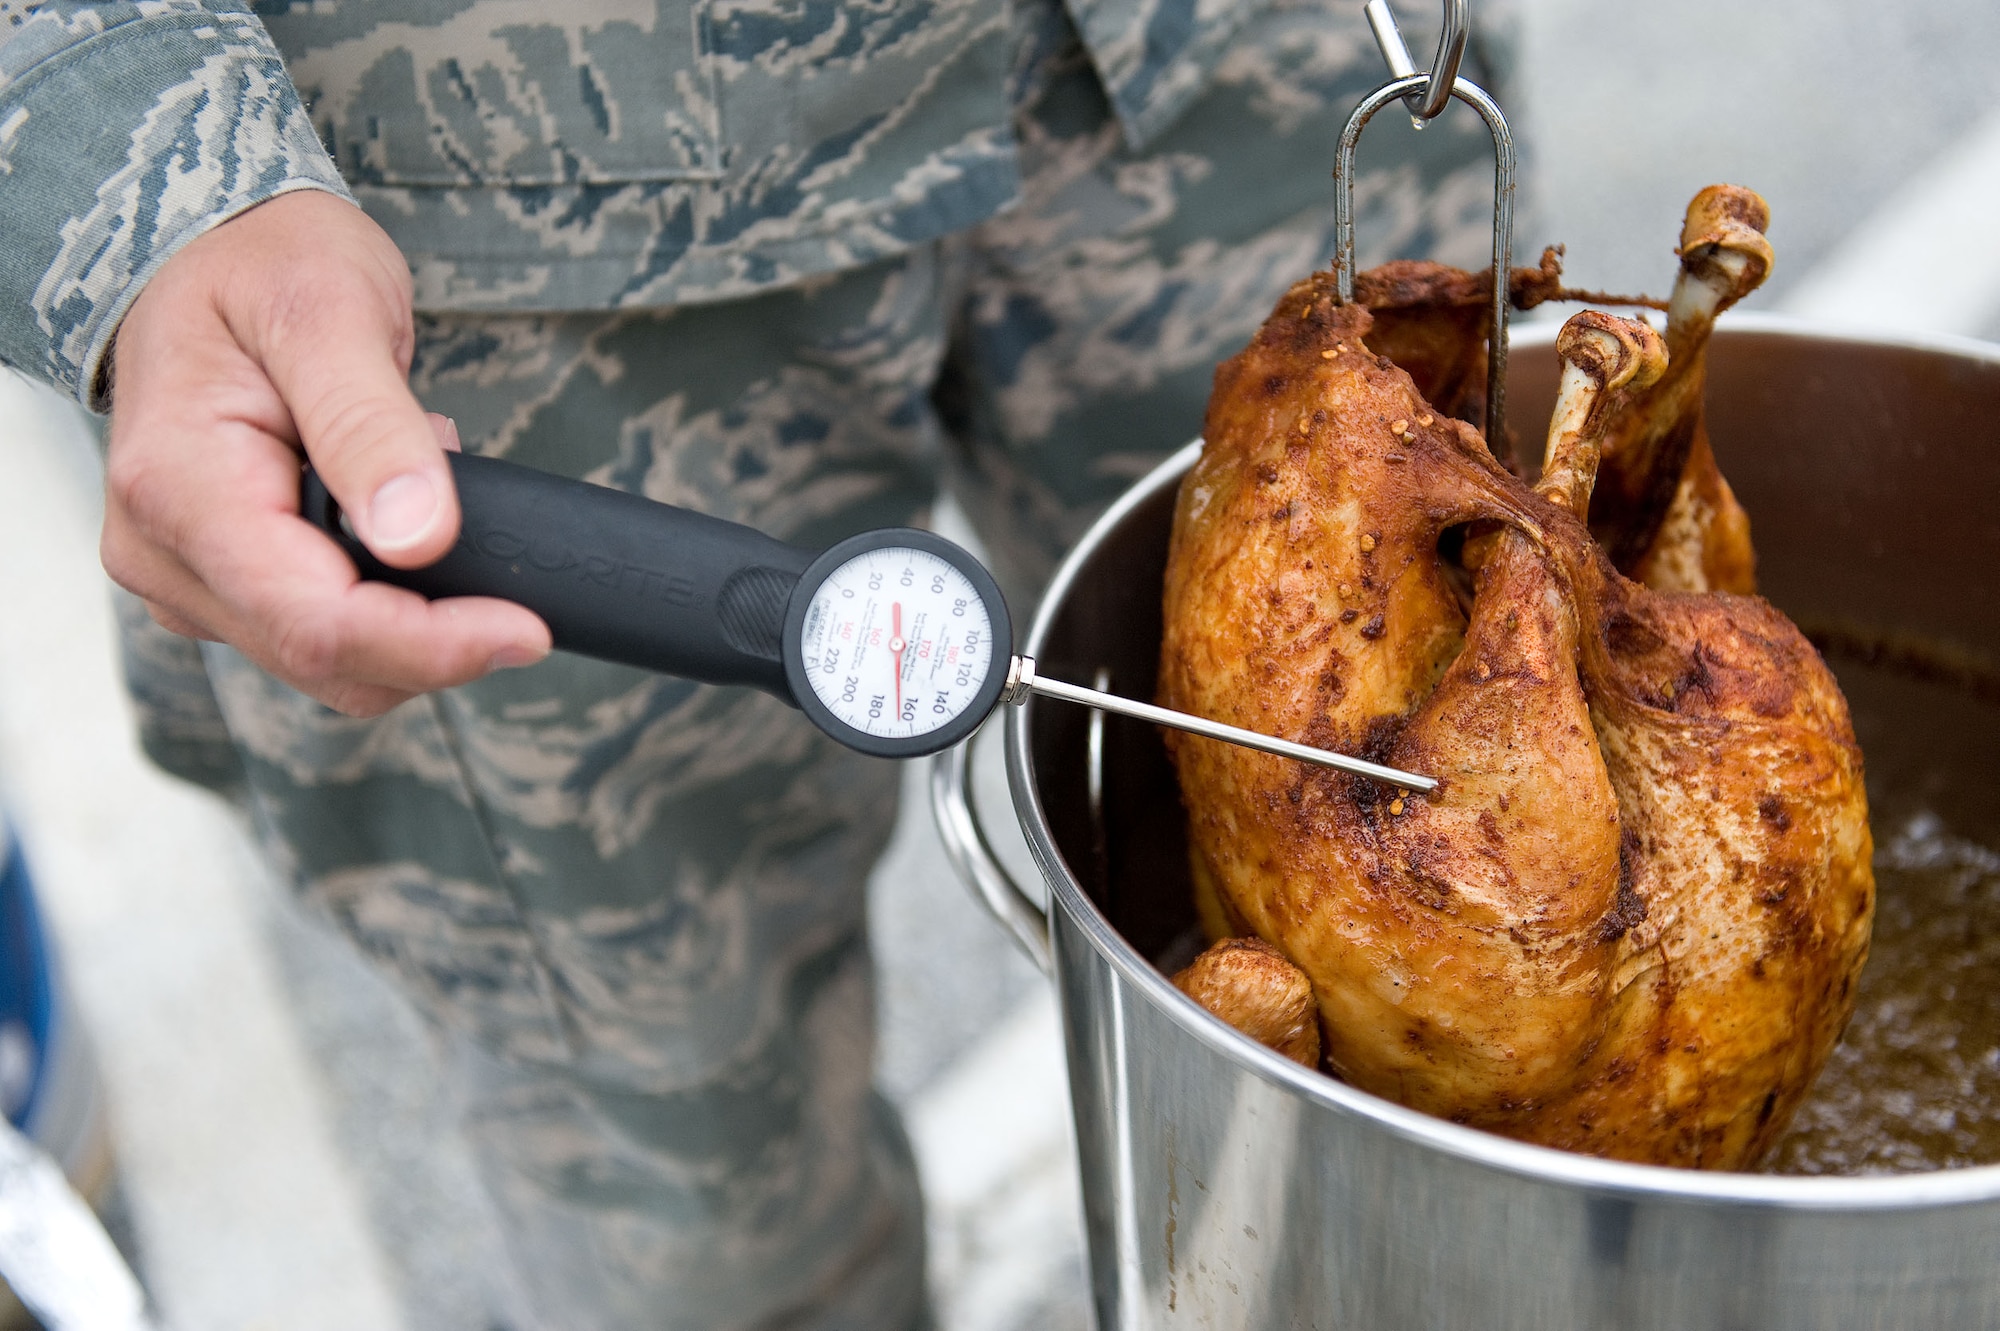 A thermometer is inserted into a turkey after it is removed from a turkey fryer Nov. 16, 2012, at Dover Air Force Base, Del. The oil temperature in the turkey fryer should be between 325 and 350 degrees while the internal meat of the bird should be between 175 and 180 degrees. (U.S. Air Force photo by Roland Balik)